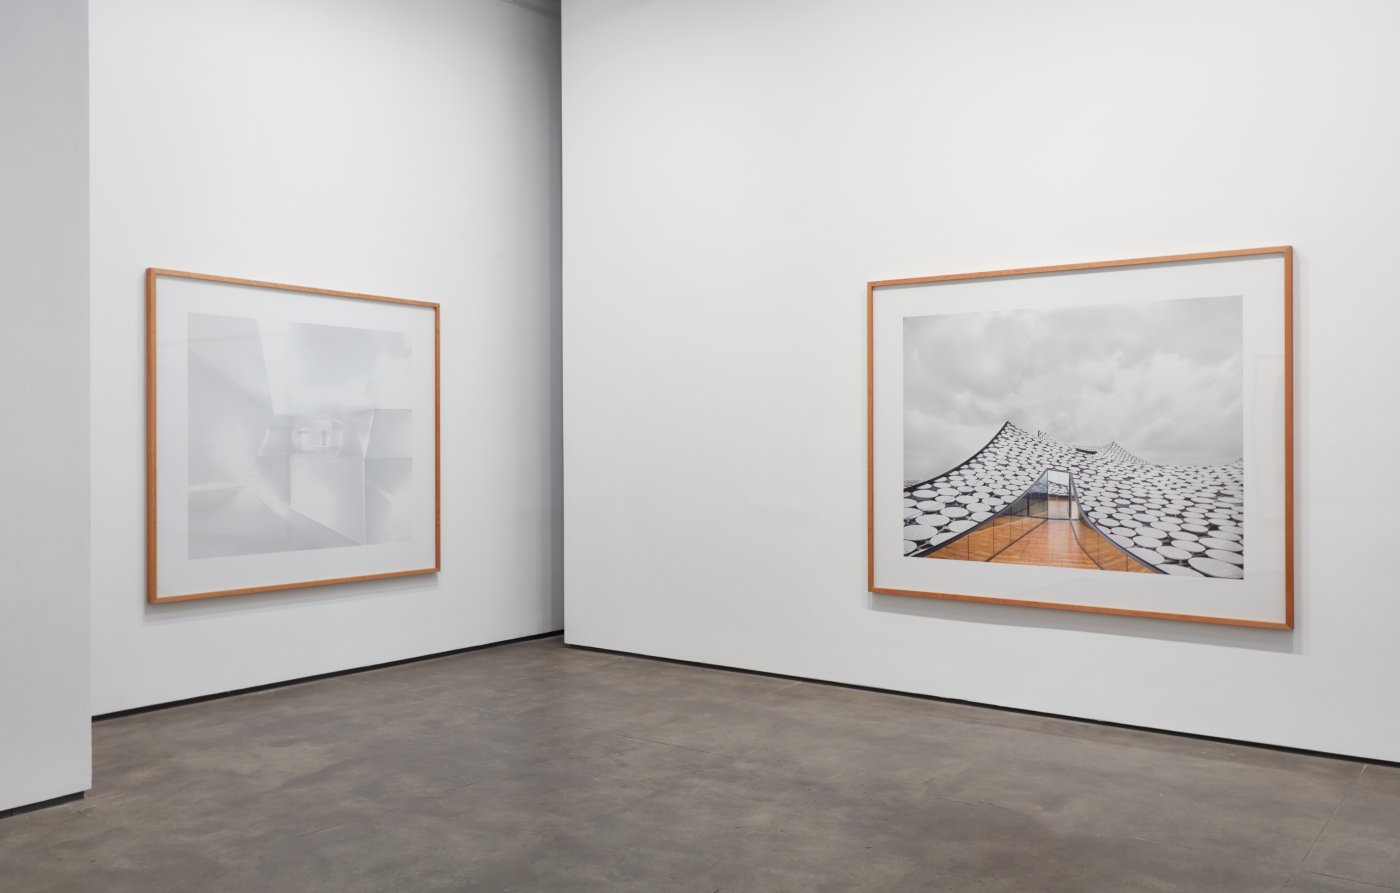 Installation image for Candida Höfer: Heaven on Earth, at Sean Kelly Gallery